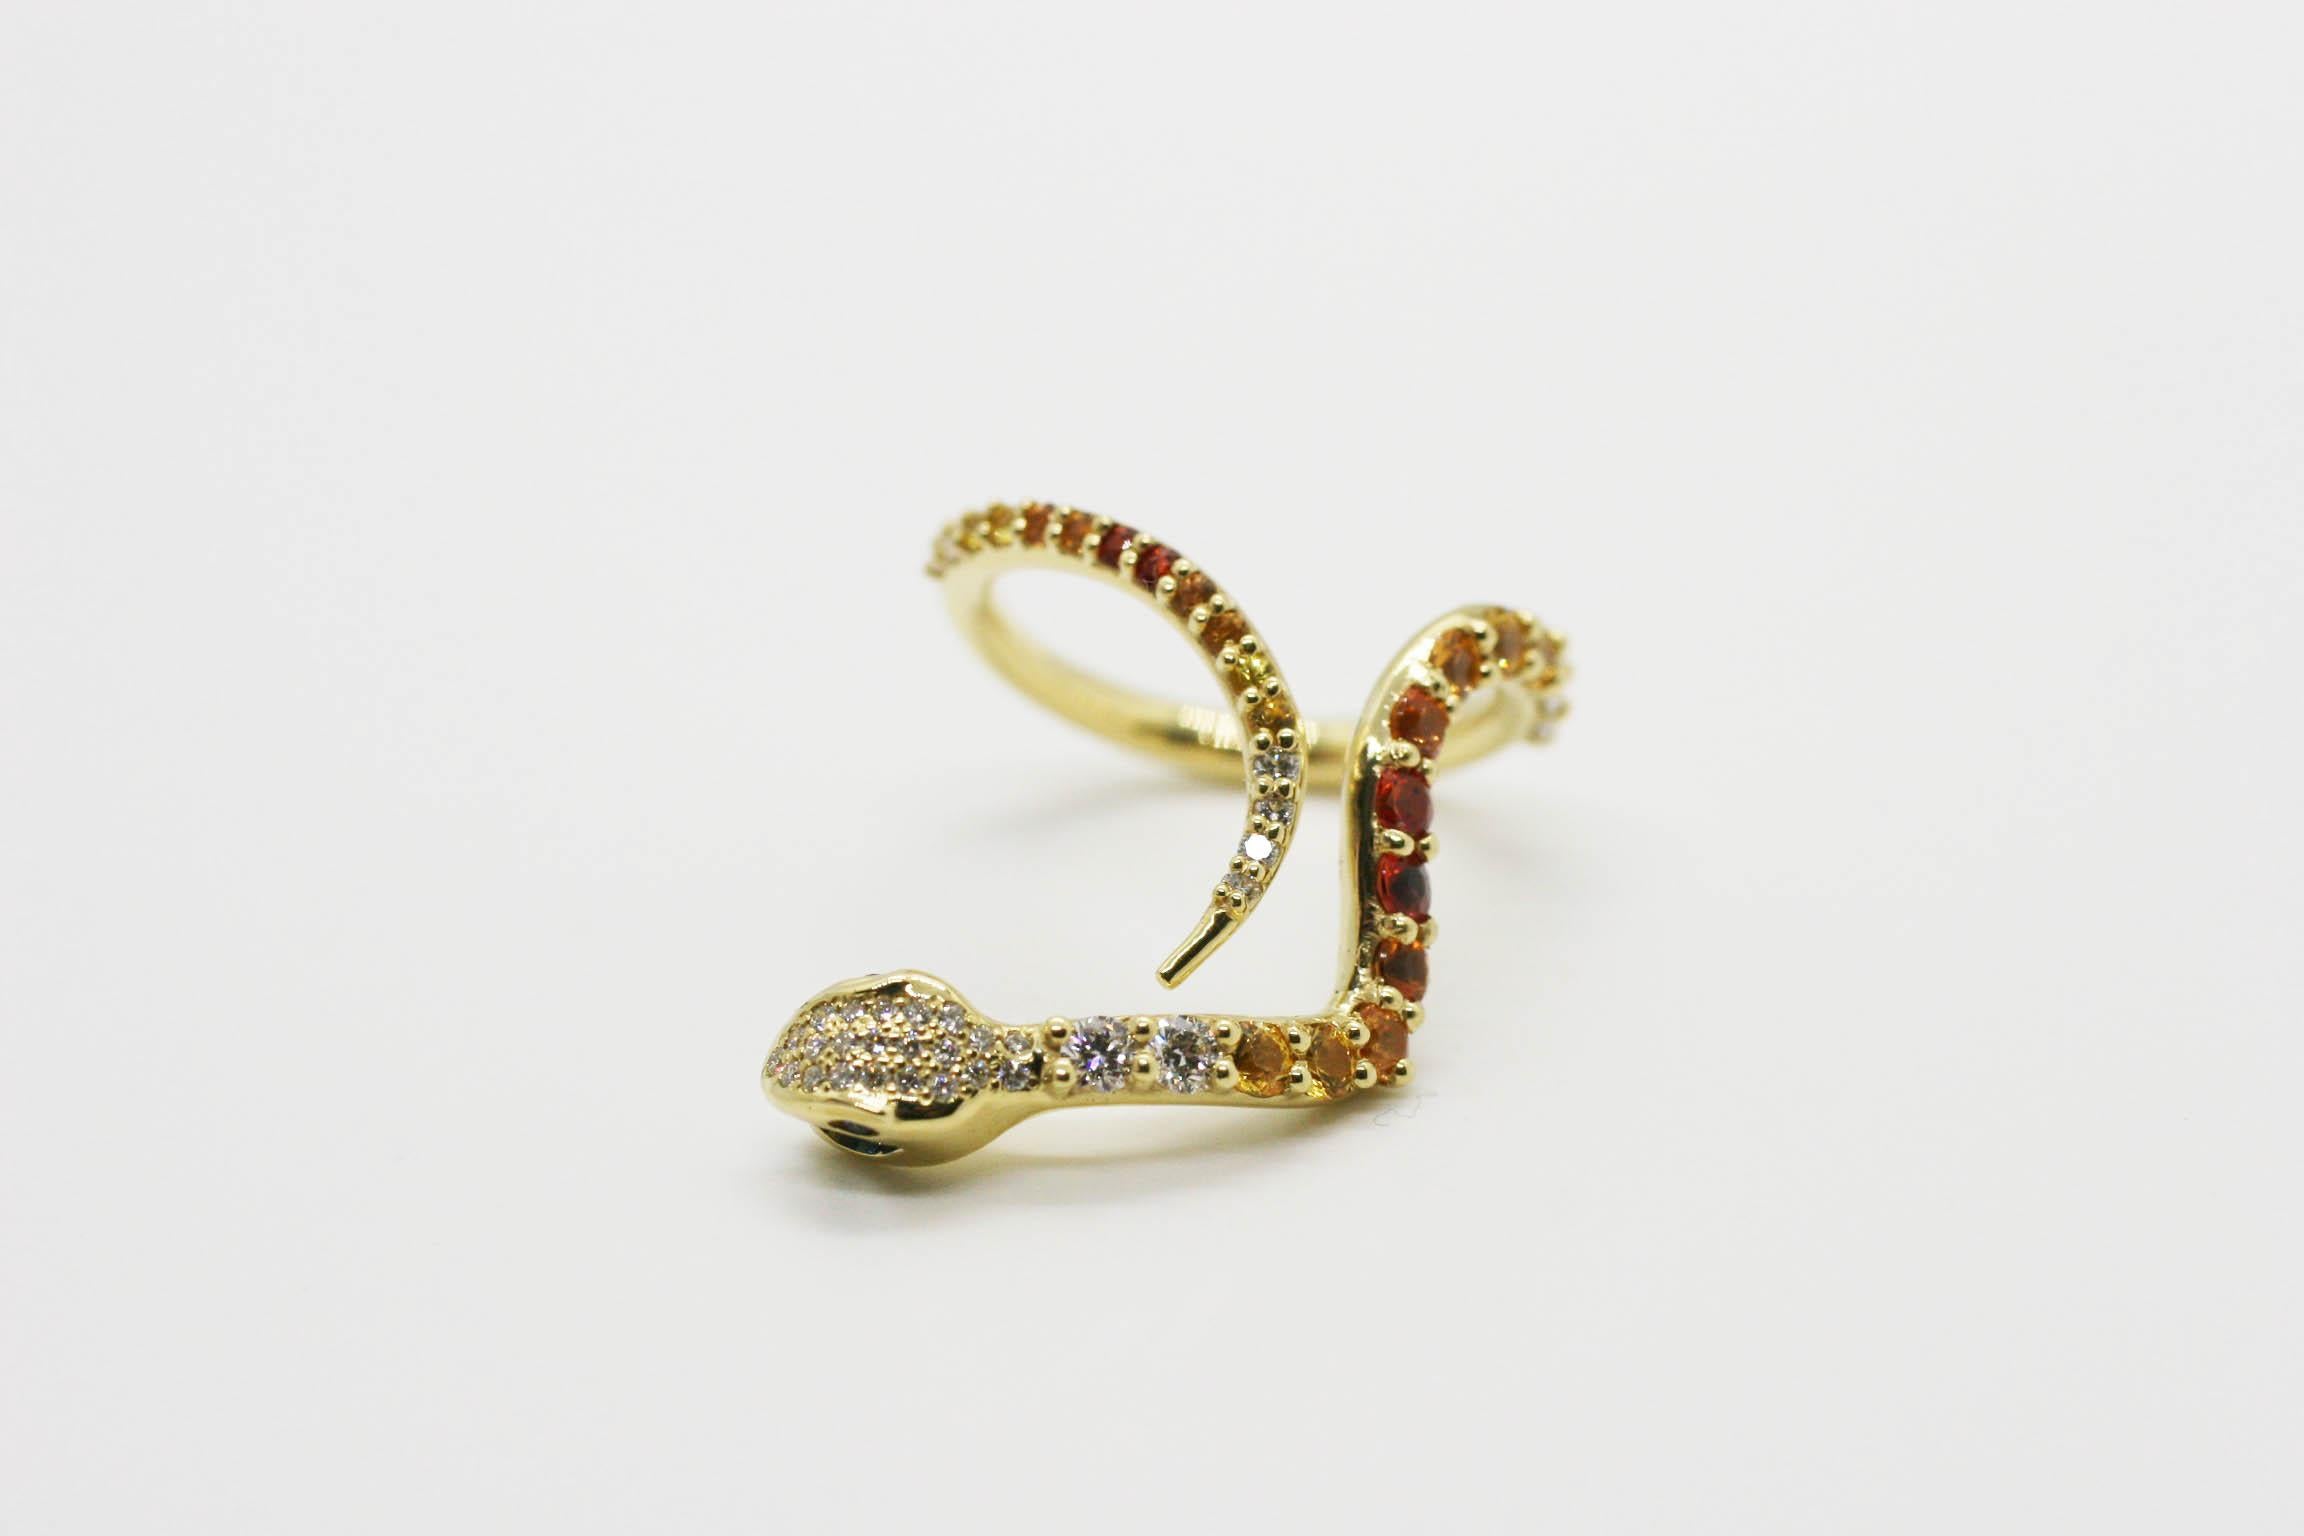 Designer Perez Bitan's signature curved snake ring is designed beautifully to slide over the knuckle and features natural yellow and orange sapphires, white diamonds, blue sapphires in the eyes, and a large blue sapphire in the mouth.  
Set in 18k